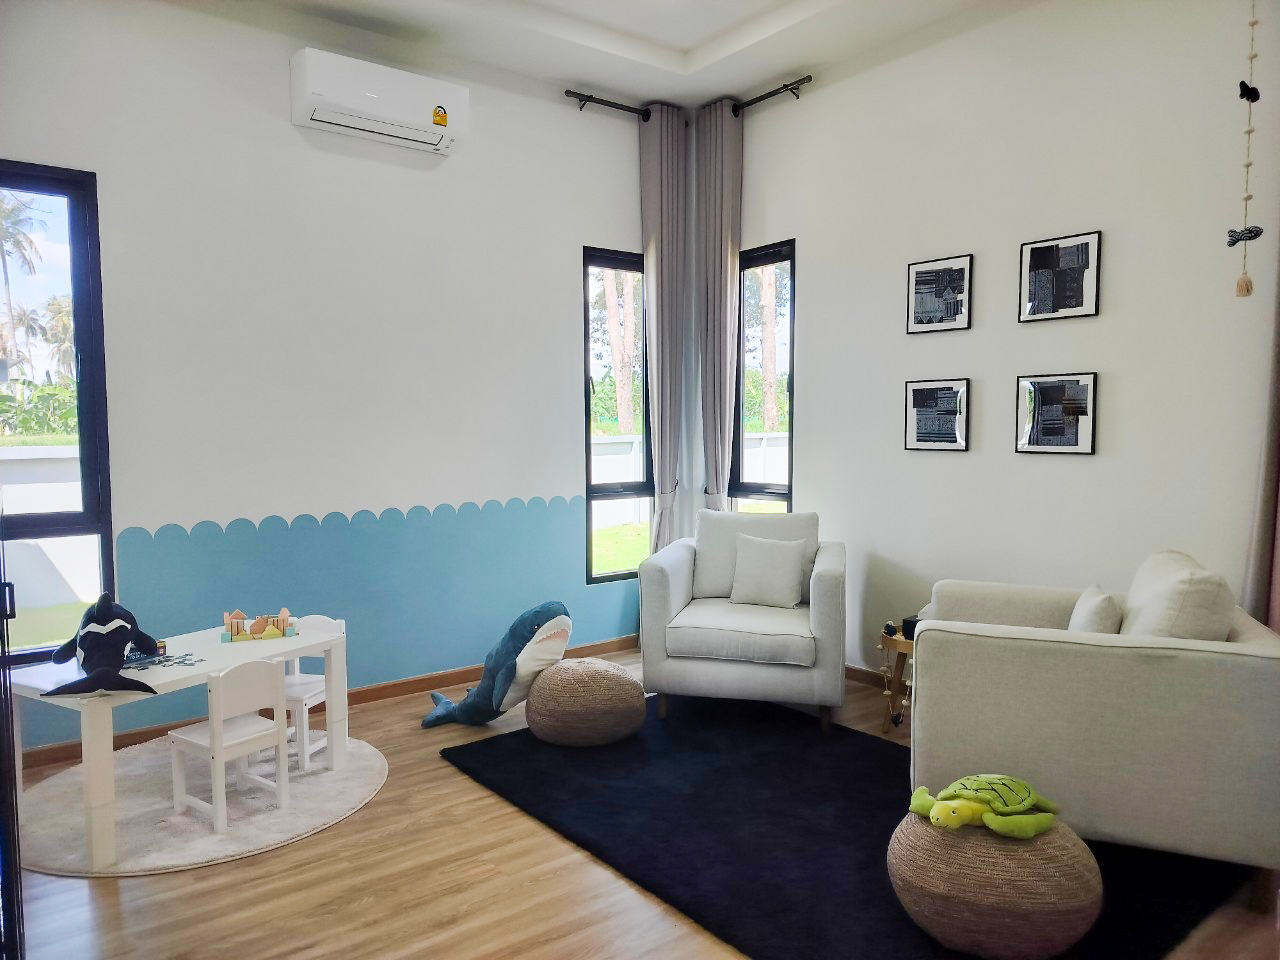 Inside the Child Advocacy Center in Pattaya, Thailand—an interior room purposefully designed for the comfort and recovery of child survivors of exploi